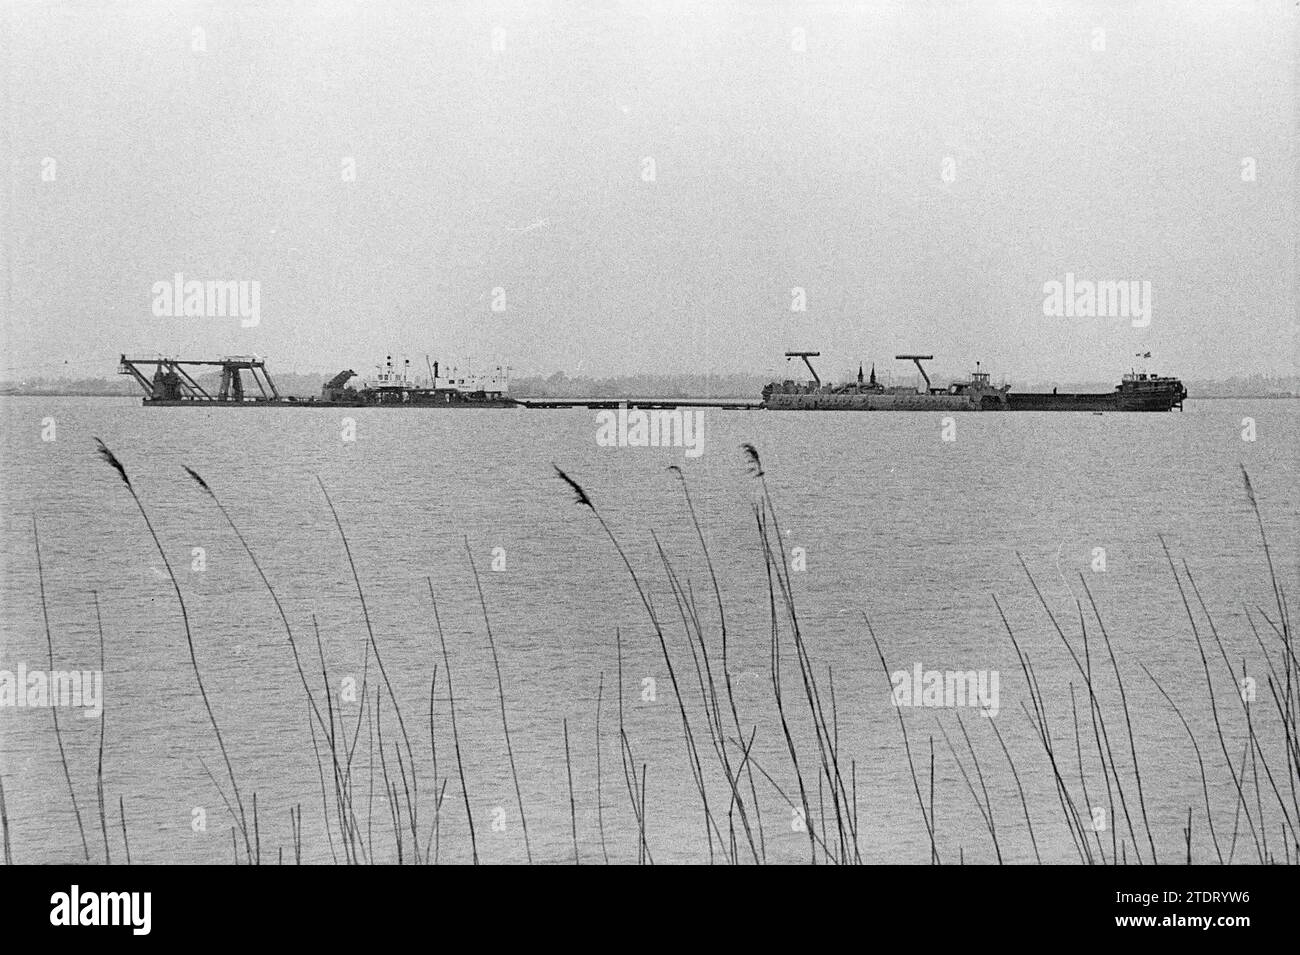 Sand dredgers in Alkmaardermeer, Sand, 09-05-1974, Whizgle News from the Past, Tailored for the Future. Explore historical narratives, Dutch The Netherlands agency image with a modern perspective, bridging the gap between yesterday's events and tomorrow's insights. A timeless journey shaping the stories that shape our future Stock Photo